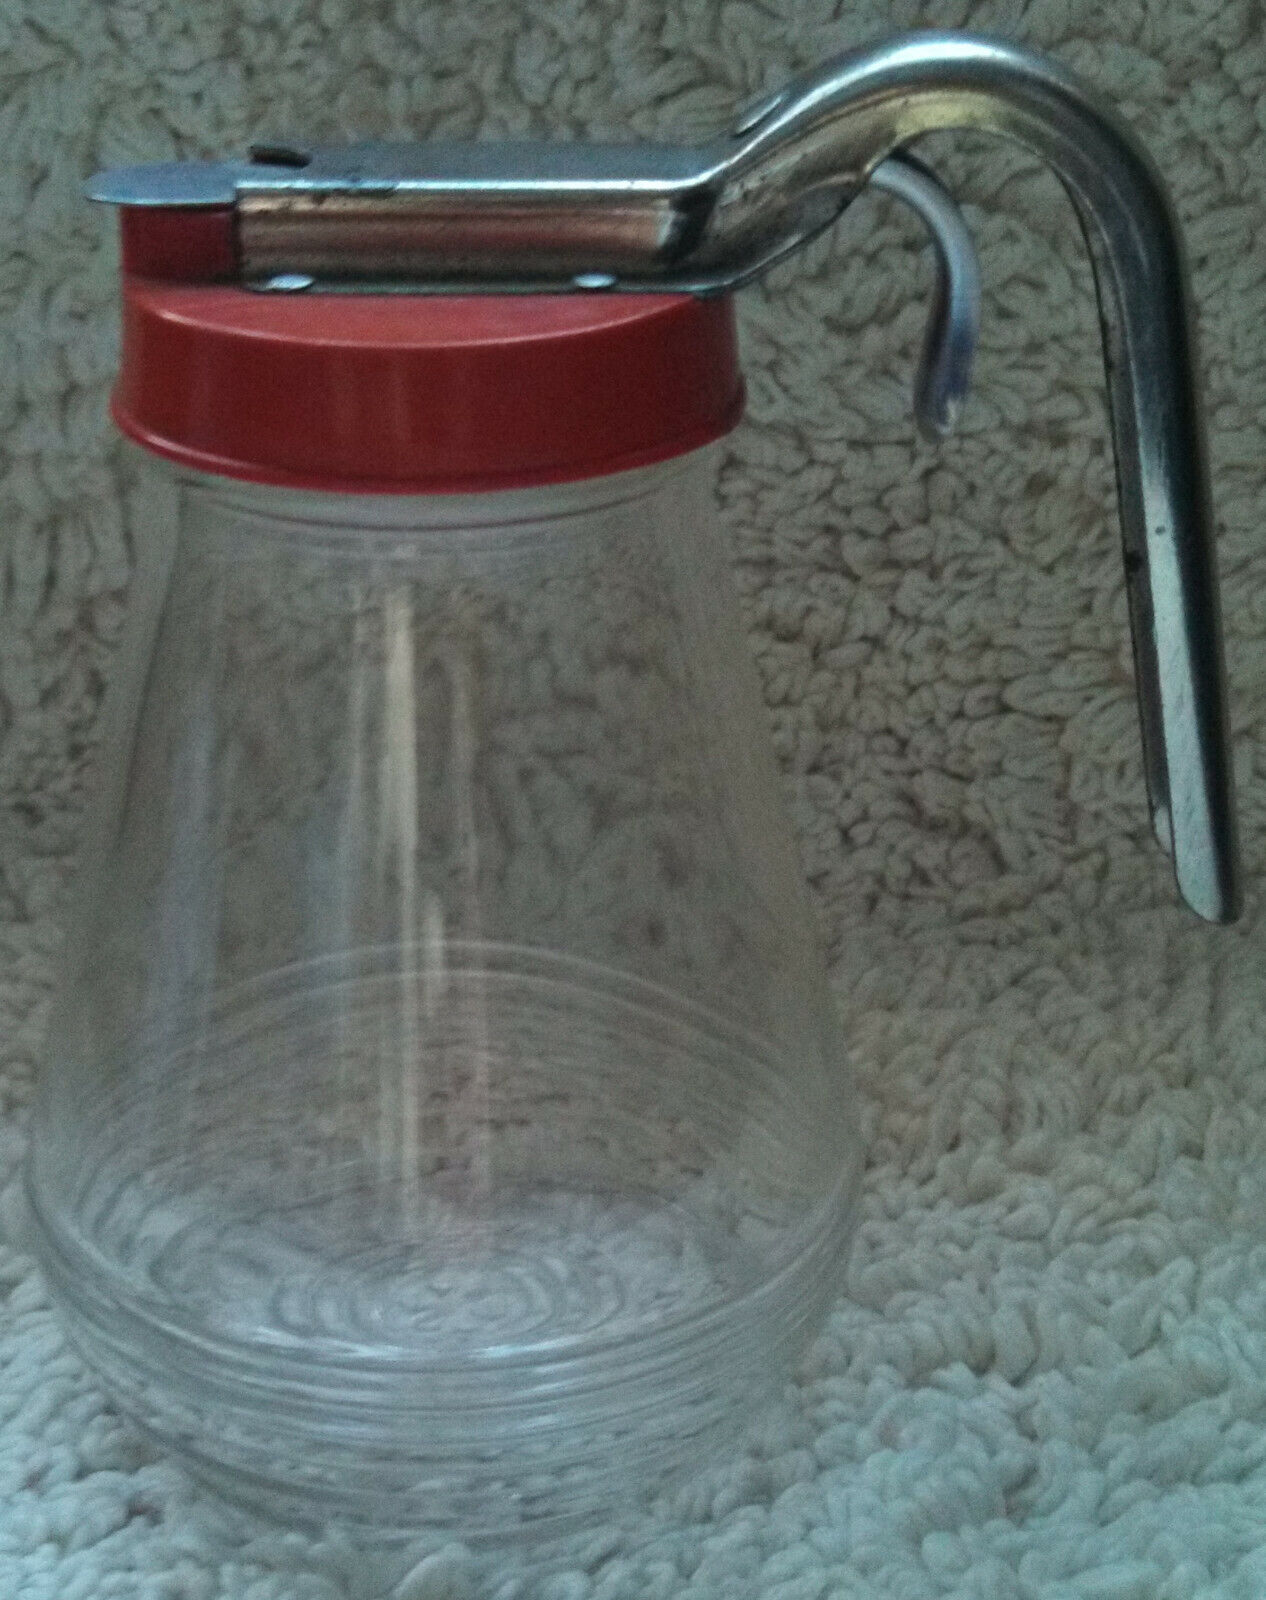 Vintage Glass Syrup Dispenser with Red Plastic Top